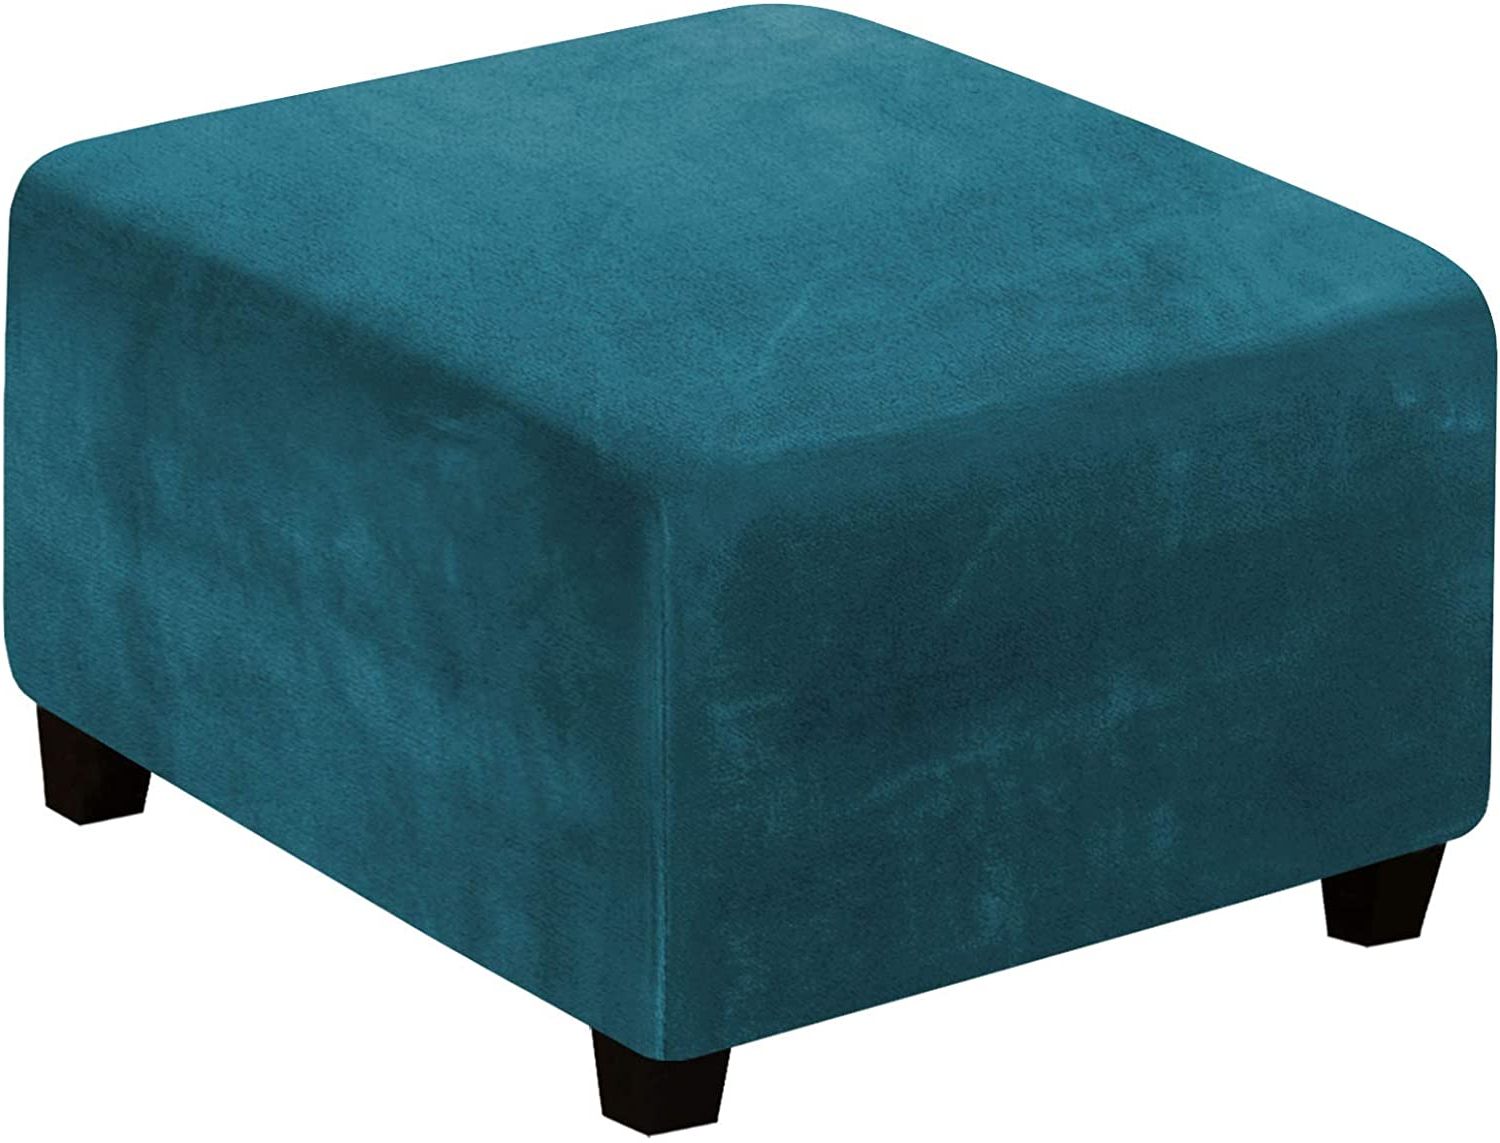 Natural Fabric Square Ottomans Pertaining To Best And Newest Amazon: Square Ottoman Covers Ottoman Slipcover Square Footstool (View 1 of 10)